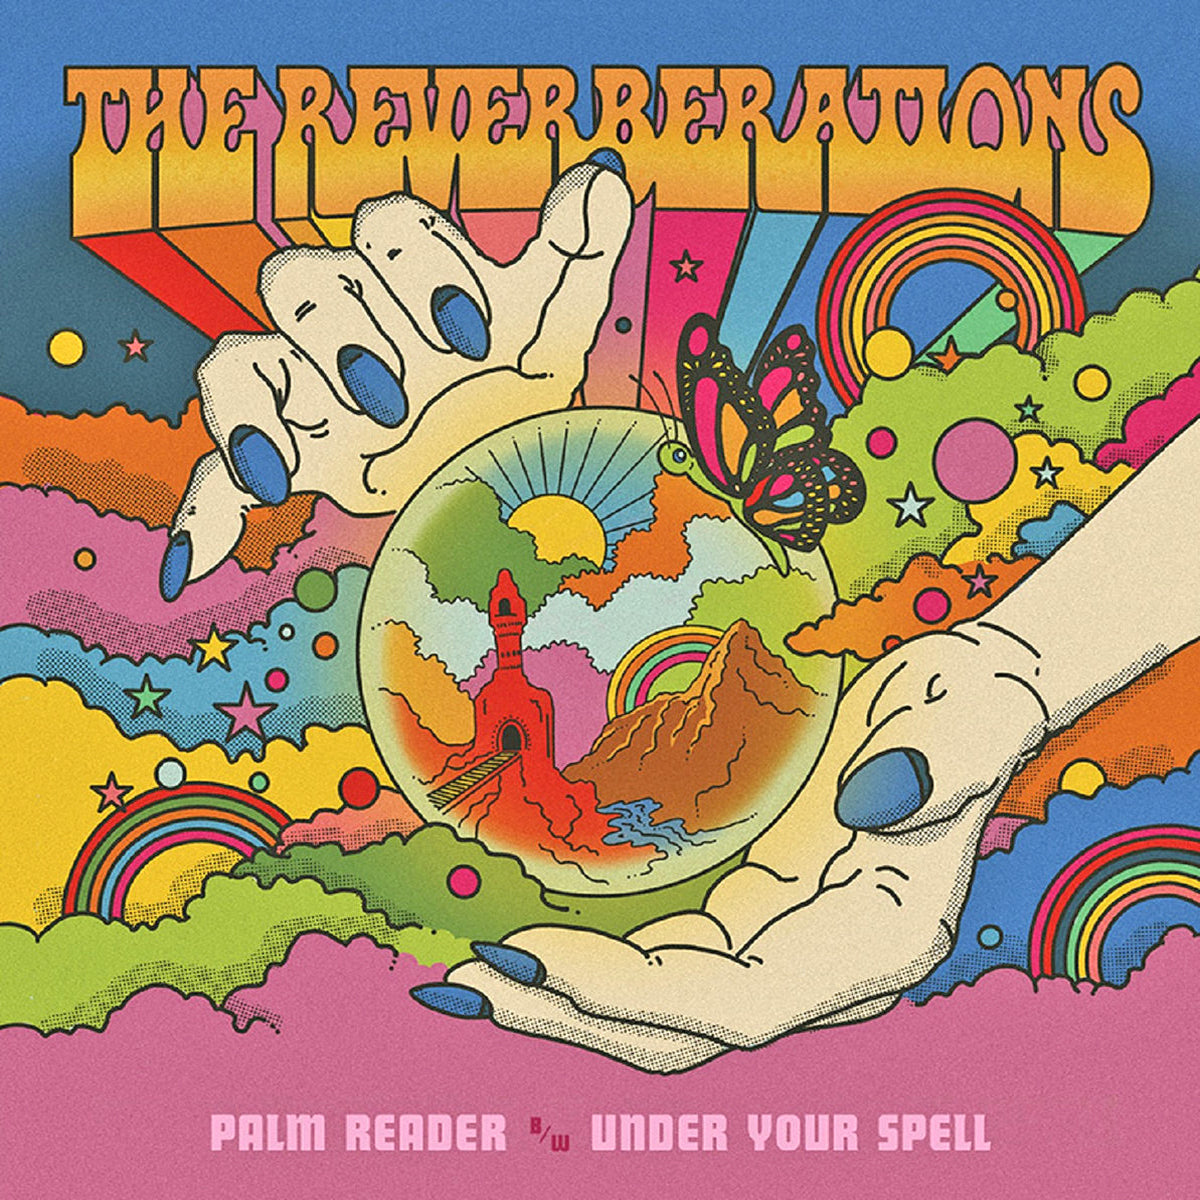 Reverberations- Palm Reader 7” ~CHOCOLATE WATCHBAND!